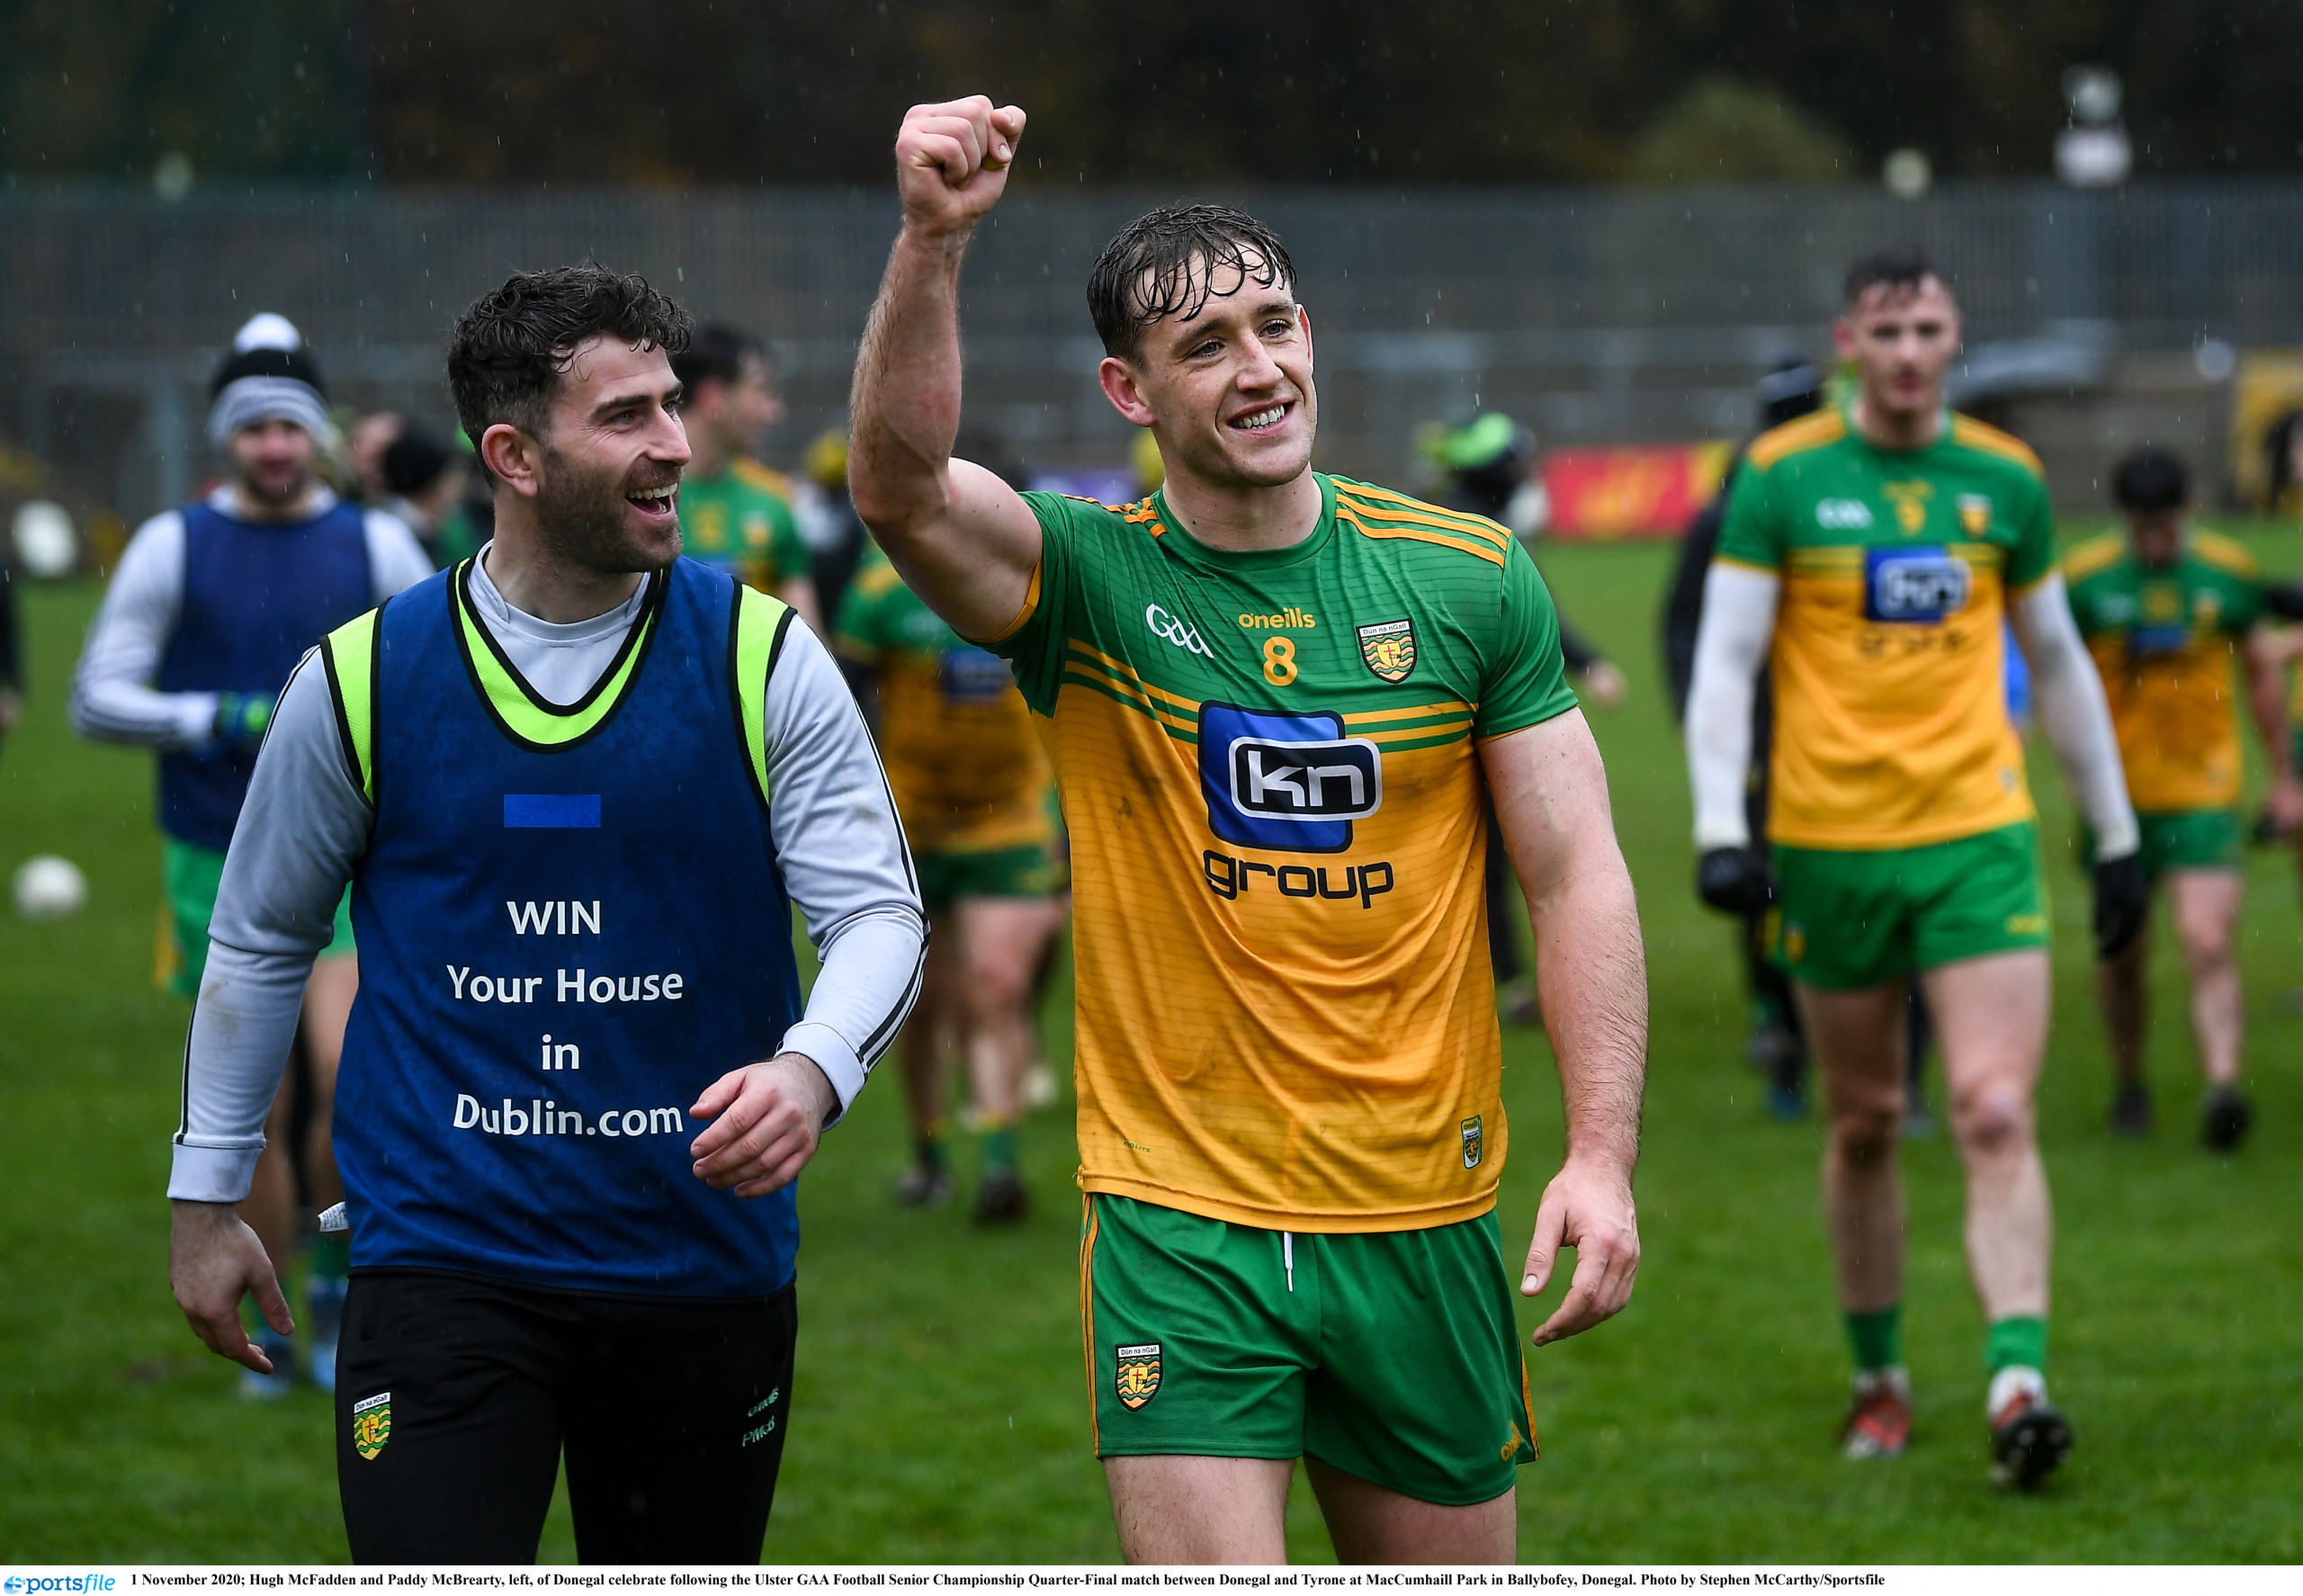 REPORT: Hard-fought win sees Donegal progress